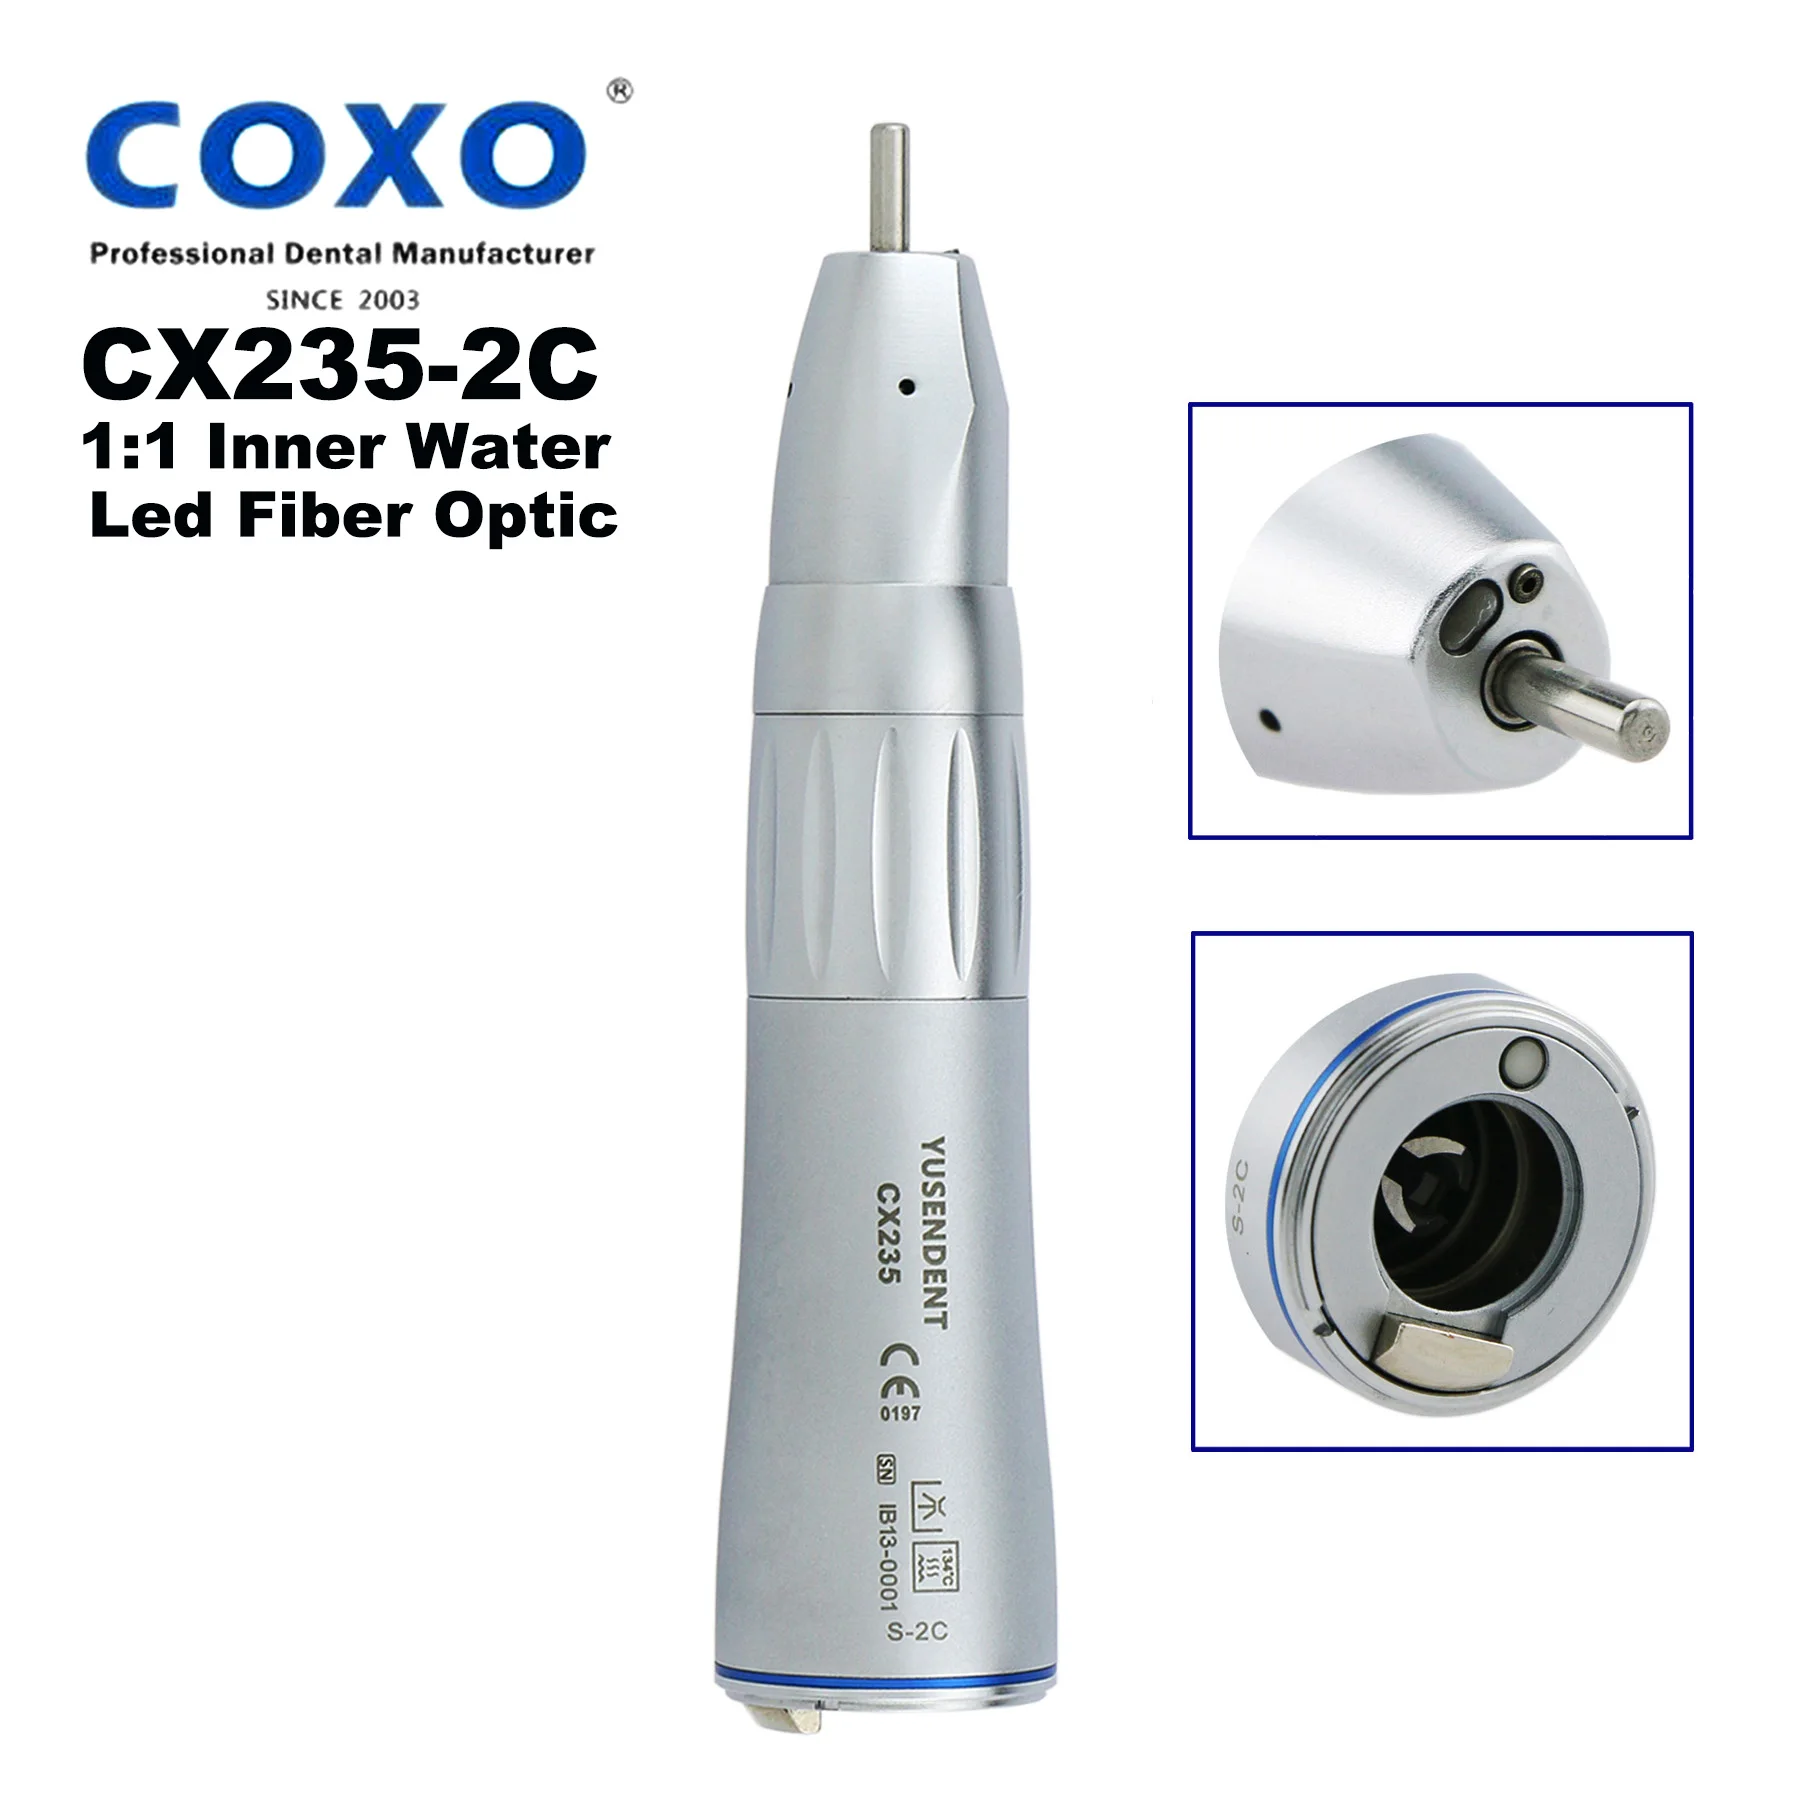 COXO YUSENDENT Dental 1:1 Inner Water Low Speed LED Fiber Optic Straight Nose Cone Handpiece Fit For ISO E type KAVO NSK